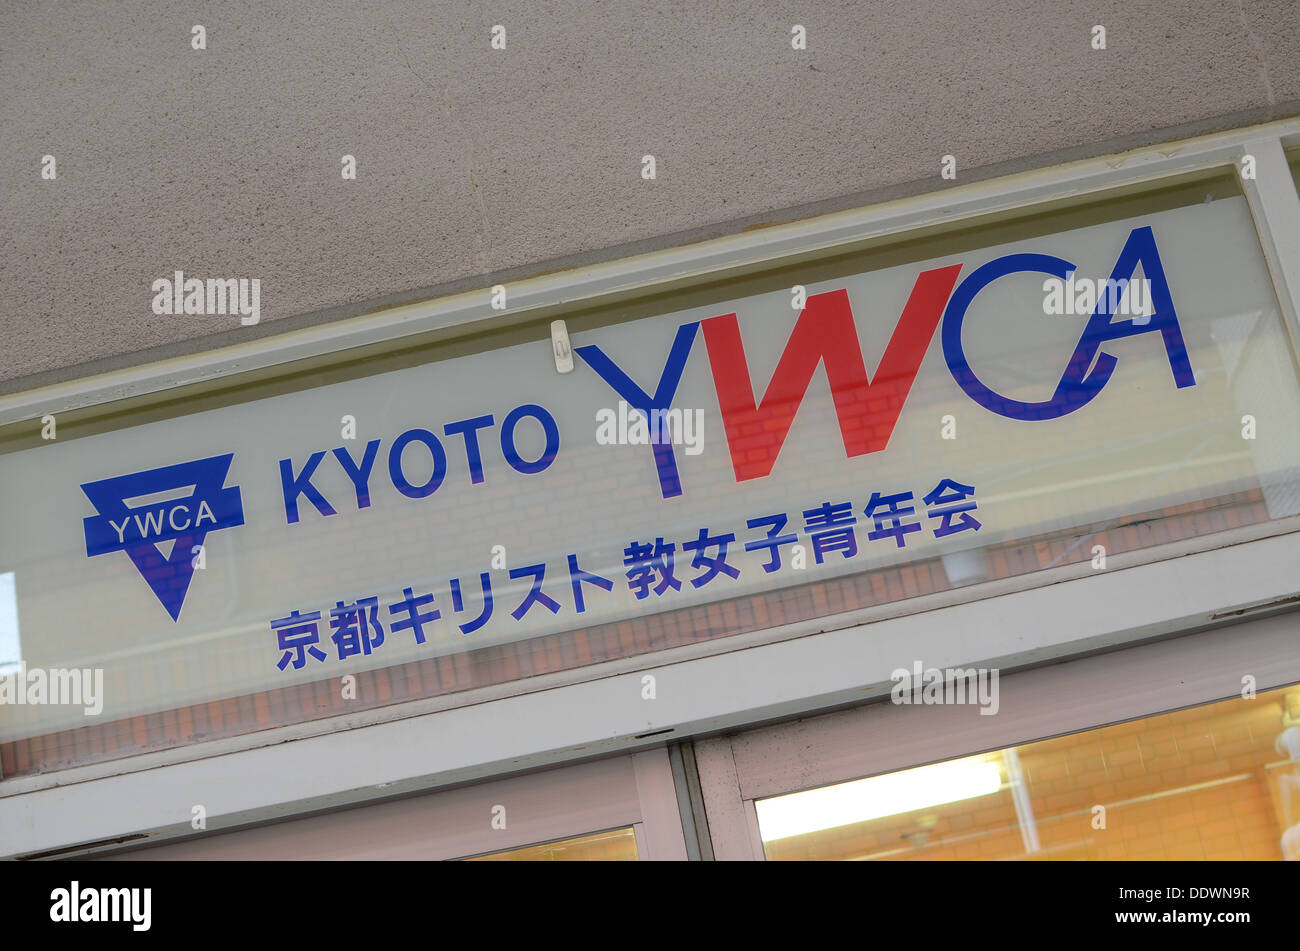 The Young Women's Christian Association (YWCA) in Kyoto, Japan. Stock Photo